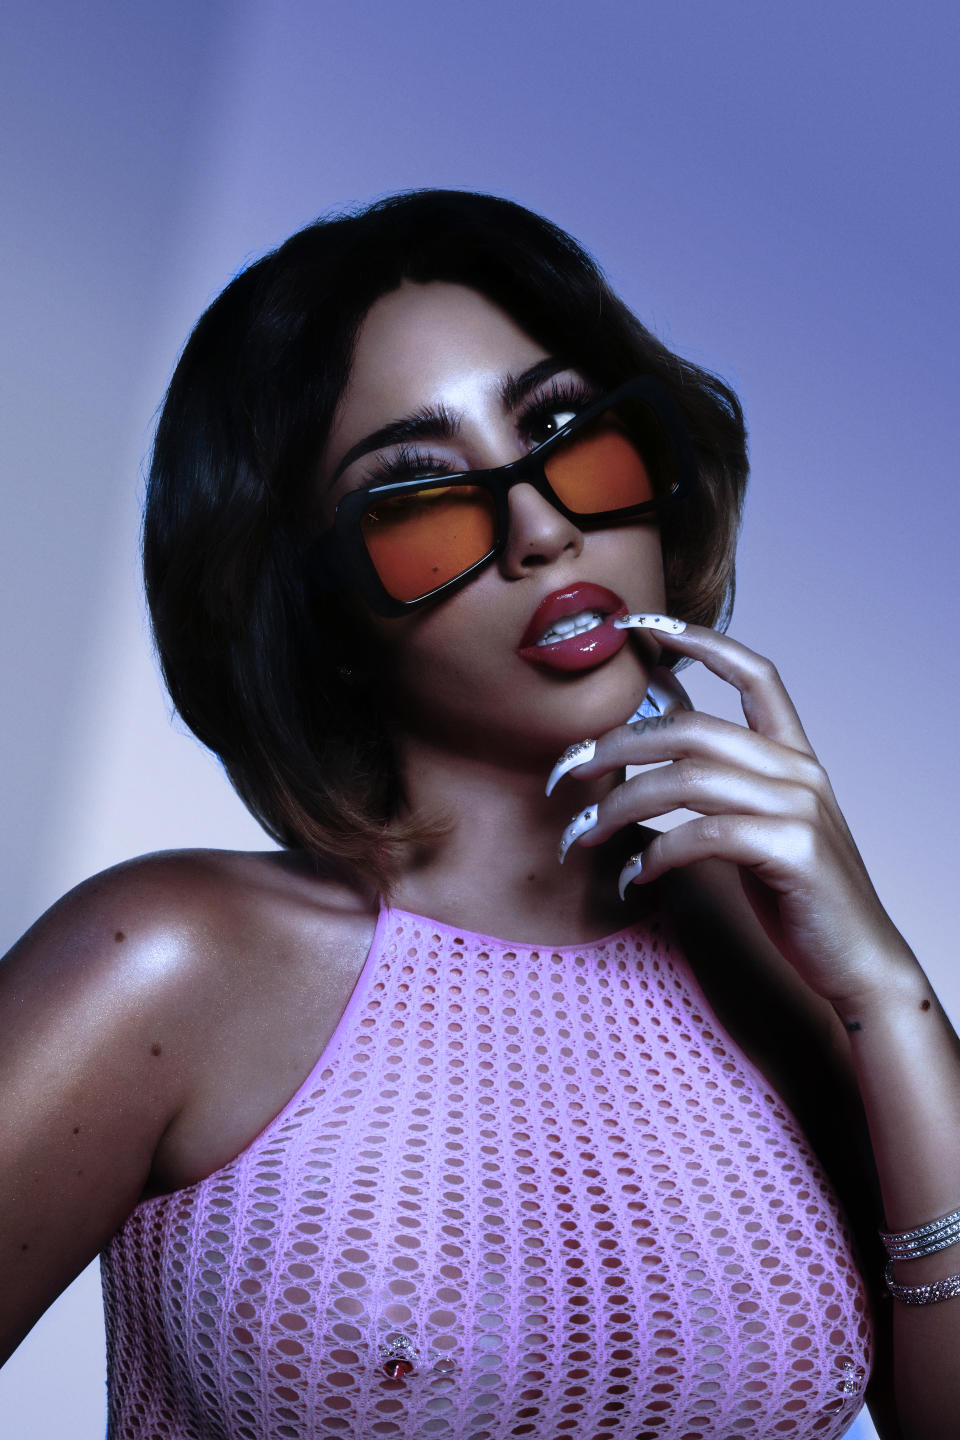 A pair of sunglasses from the Kali Uchis x Dime collection. - Credit: Courtesy of Dime Optics